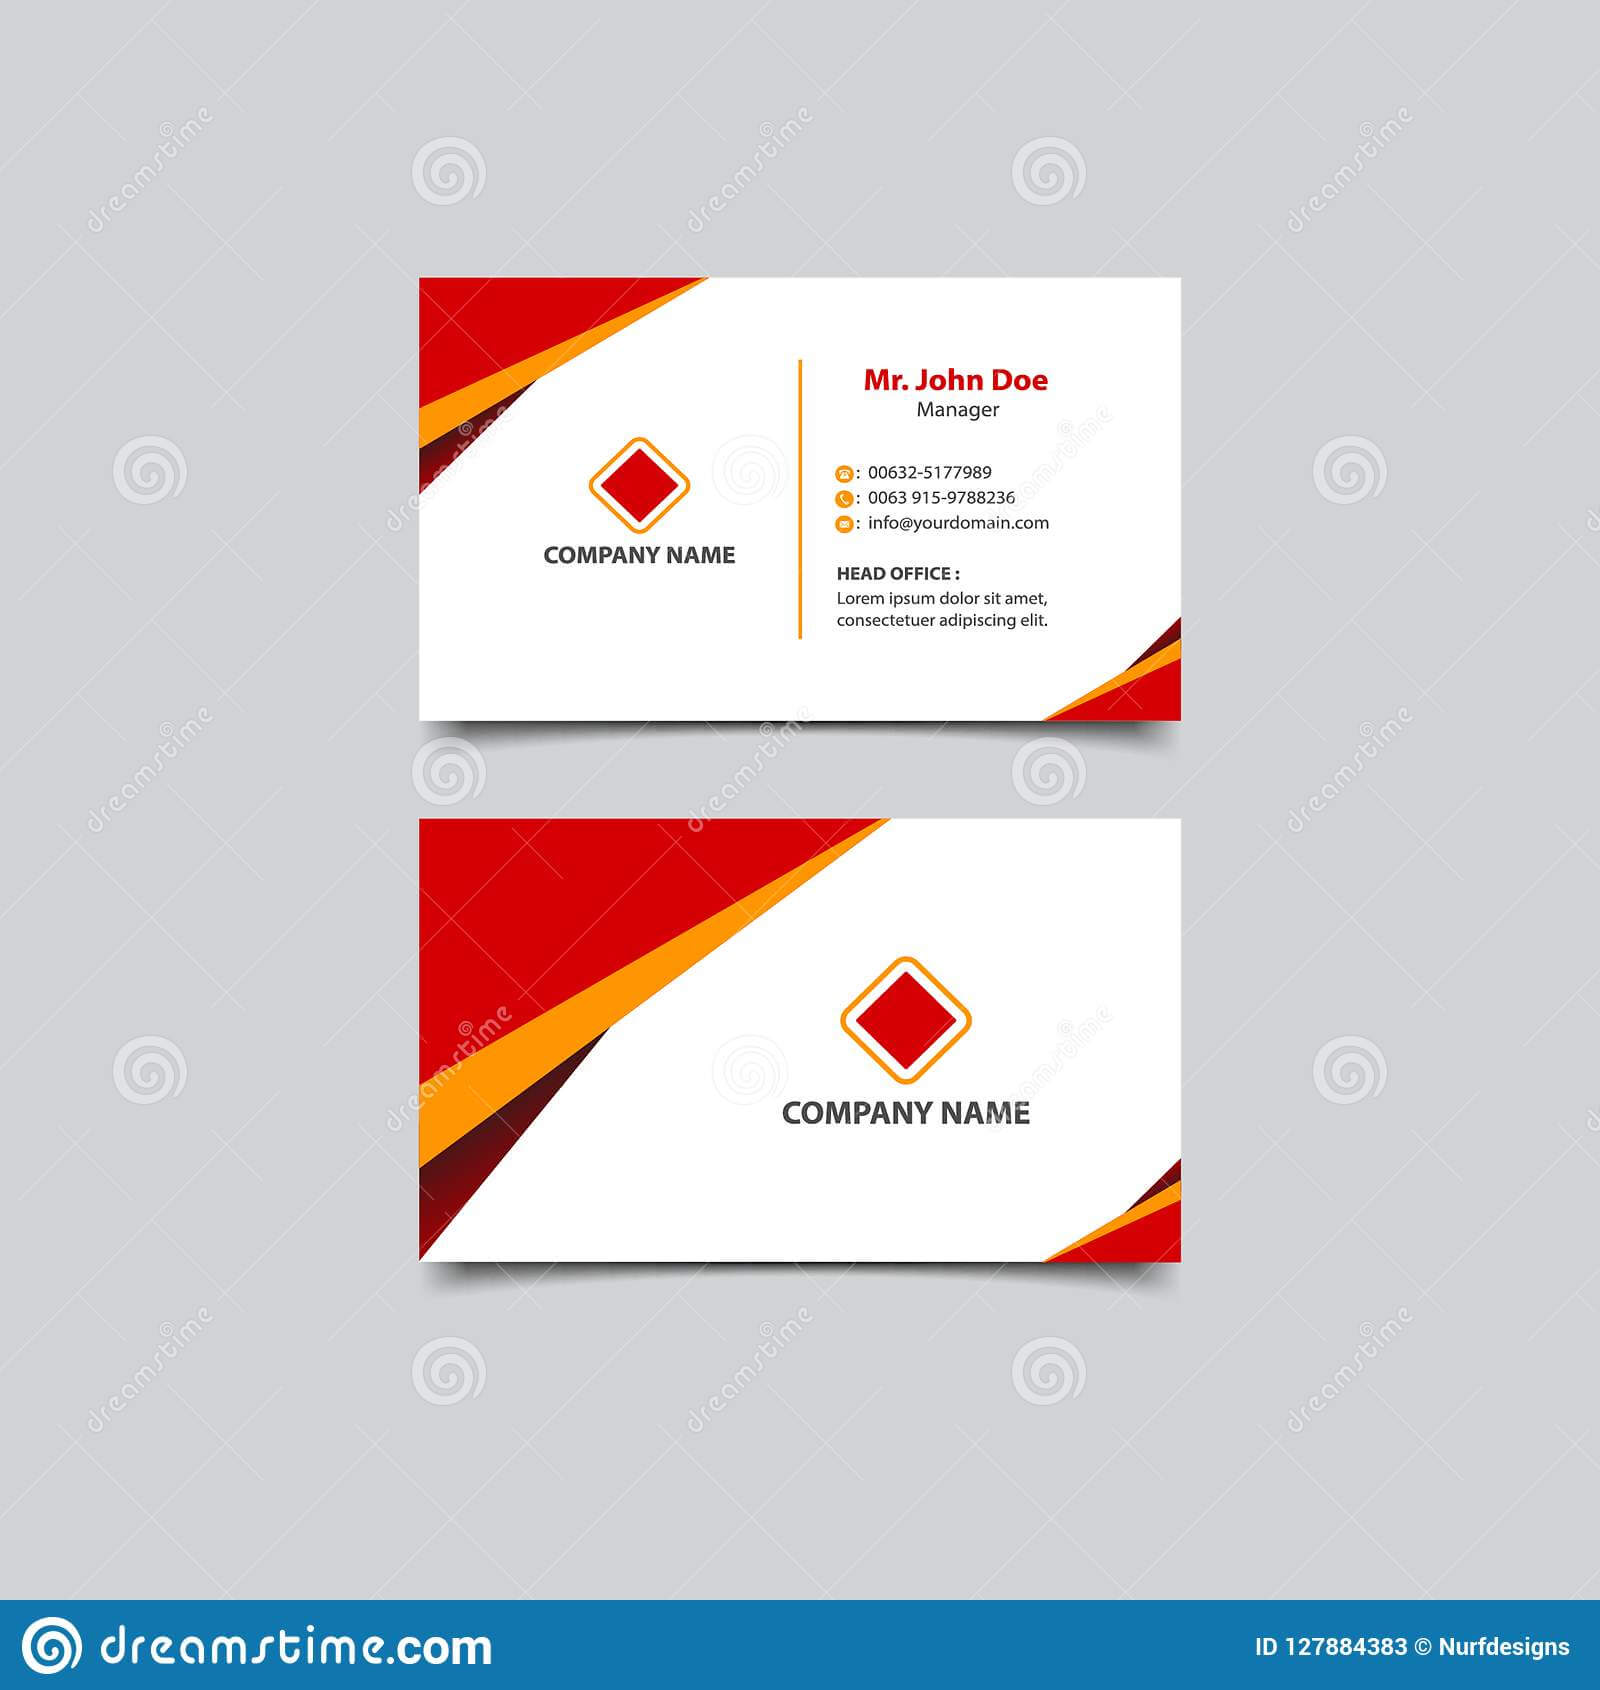 Simple And Modern Business Card Template Design Stock Vector Within Modern Business Card Design Templates